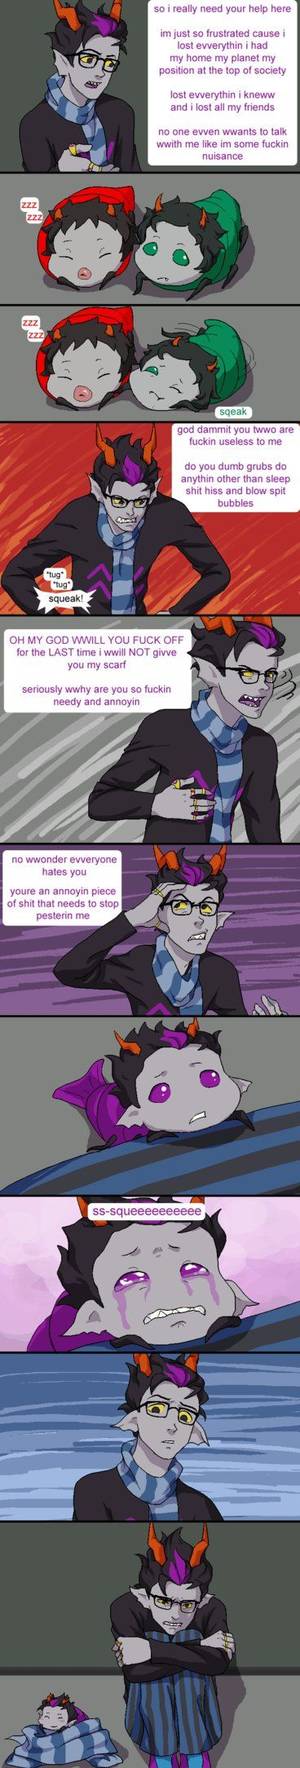 Homestuck Grand High Boob Porn - Even annoying pieces of shit have feelings and if u can't respect their  feelings